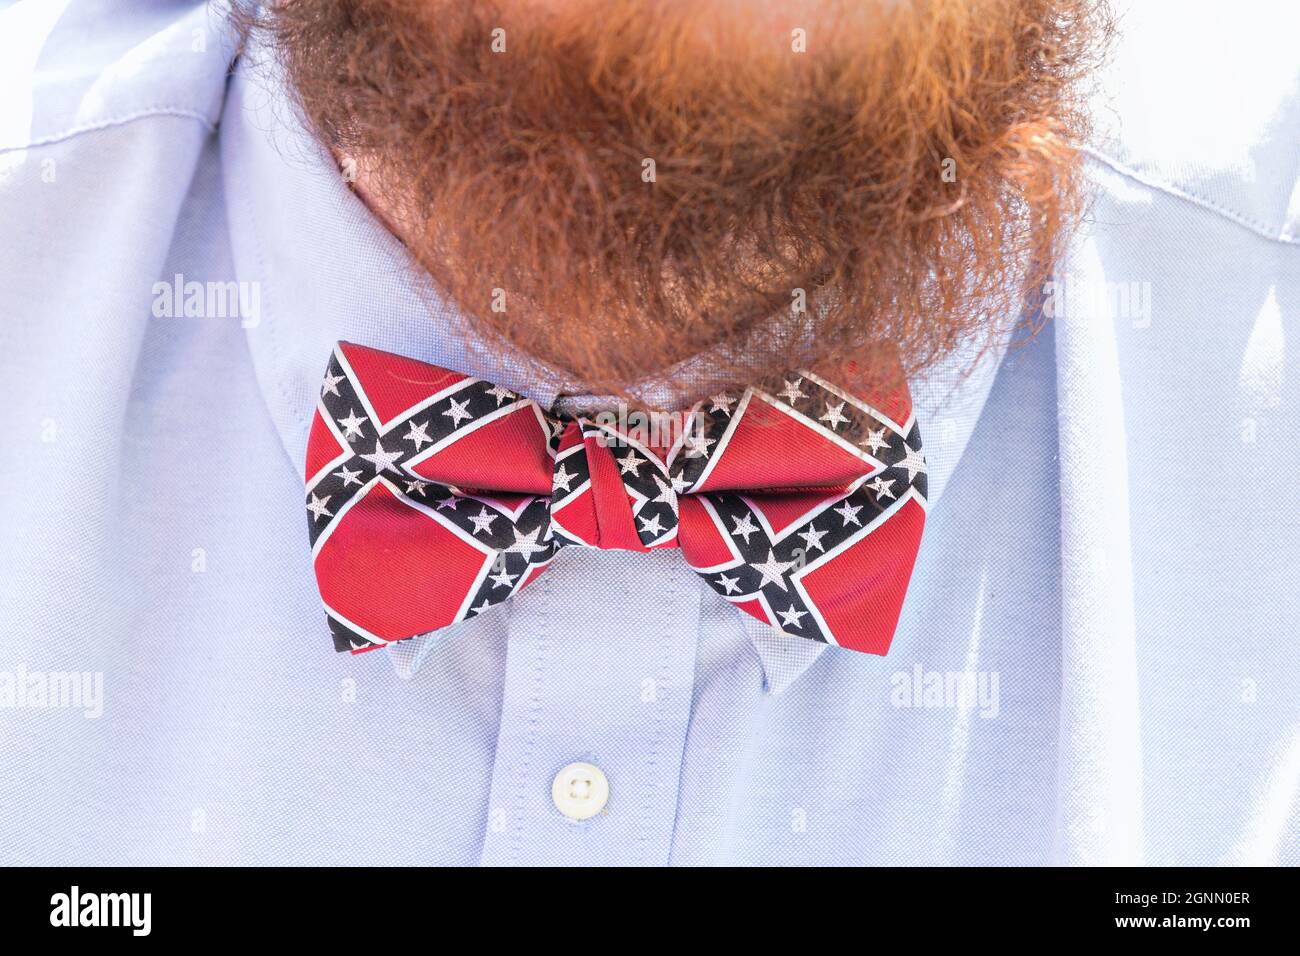 A confederate supporter wears a rebel flag bow tie during a memorial ceremony at Elmwood Cemetery to mark Confederate Memorial Day May 7, 2016 in Columbia, South Carolina. The events marking southern Confederate heritage come nearly a year after the removal of the confederate flag from the capitol following the murder of nine people at the historic black Mother Emanuel AME Church. Stock Photo